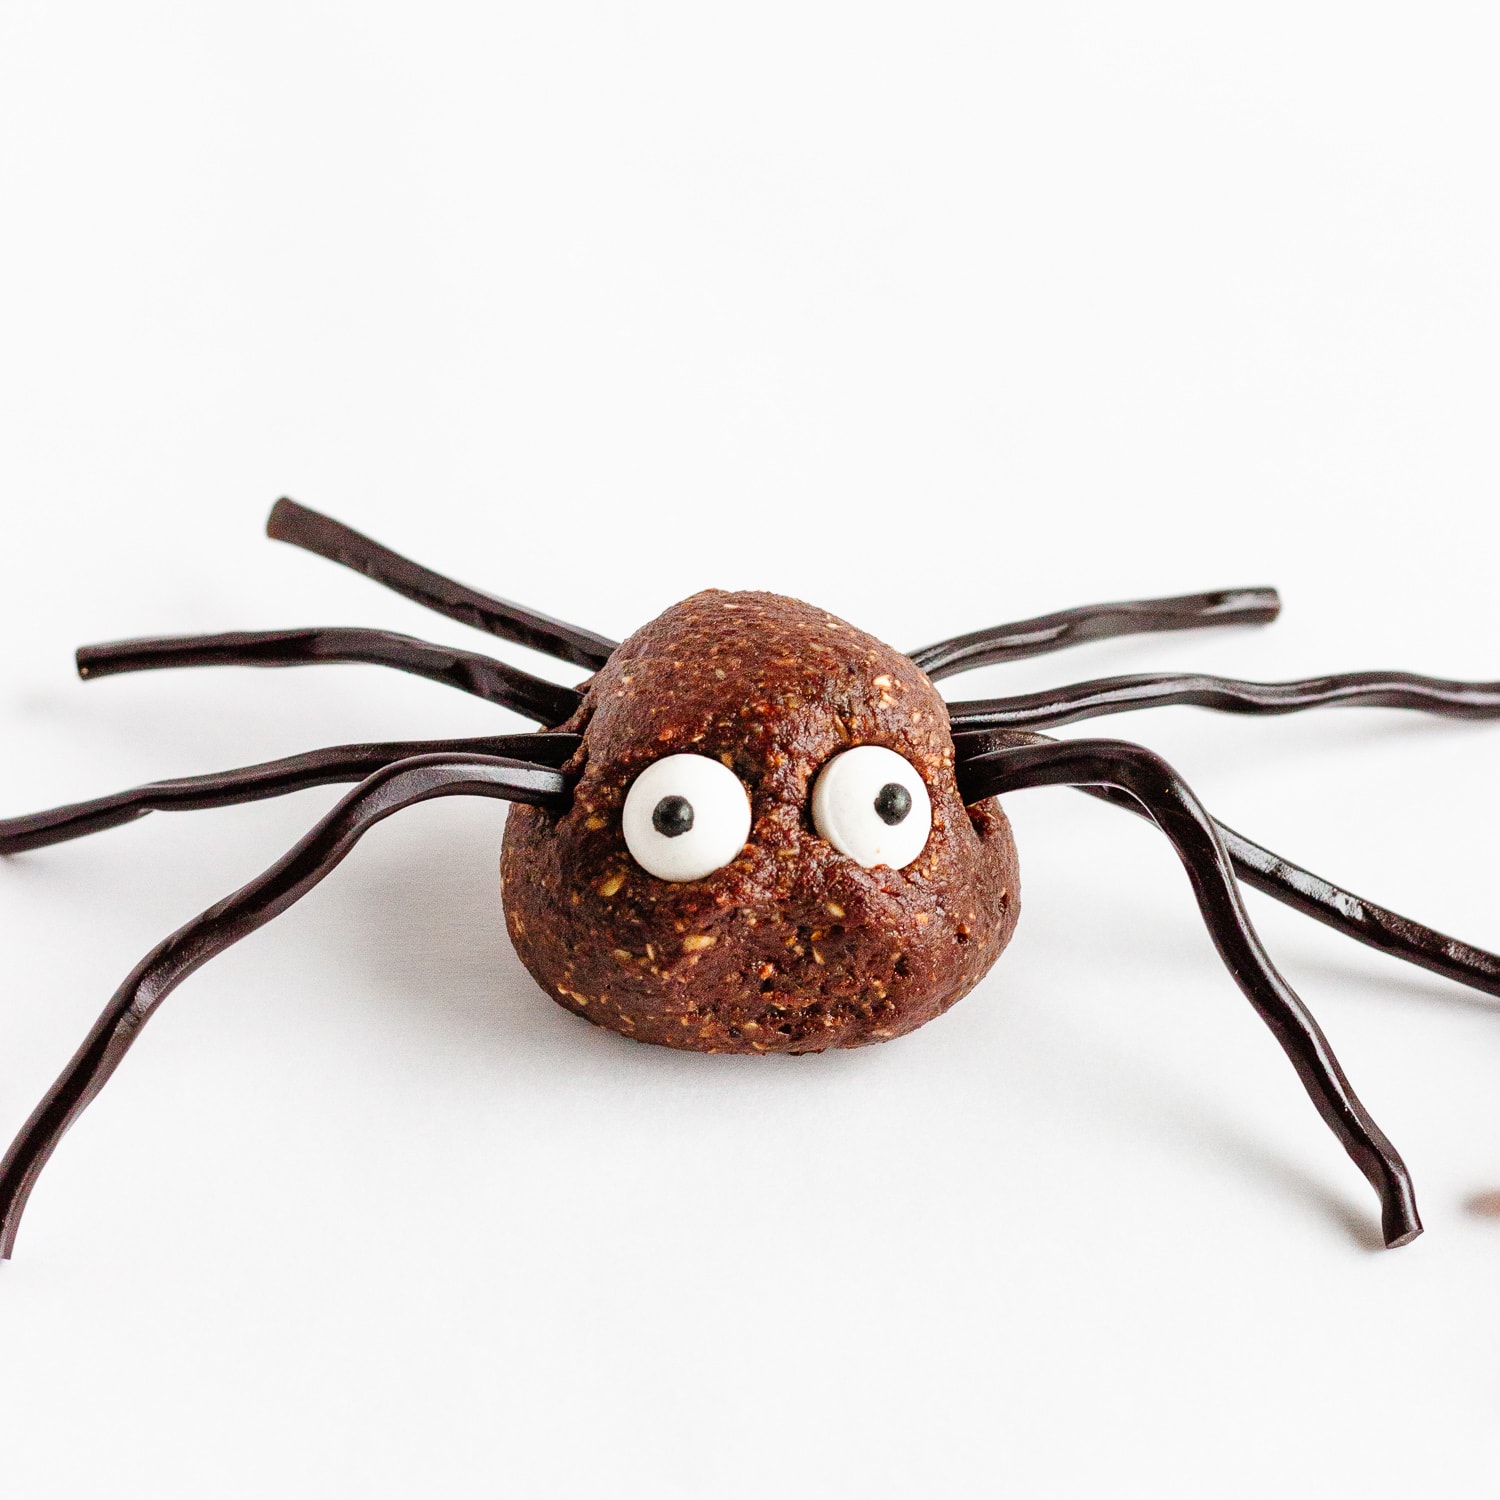 An energy ball turned into a spider for Halloween.